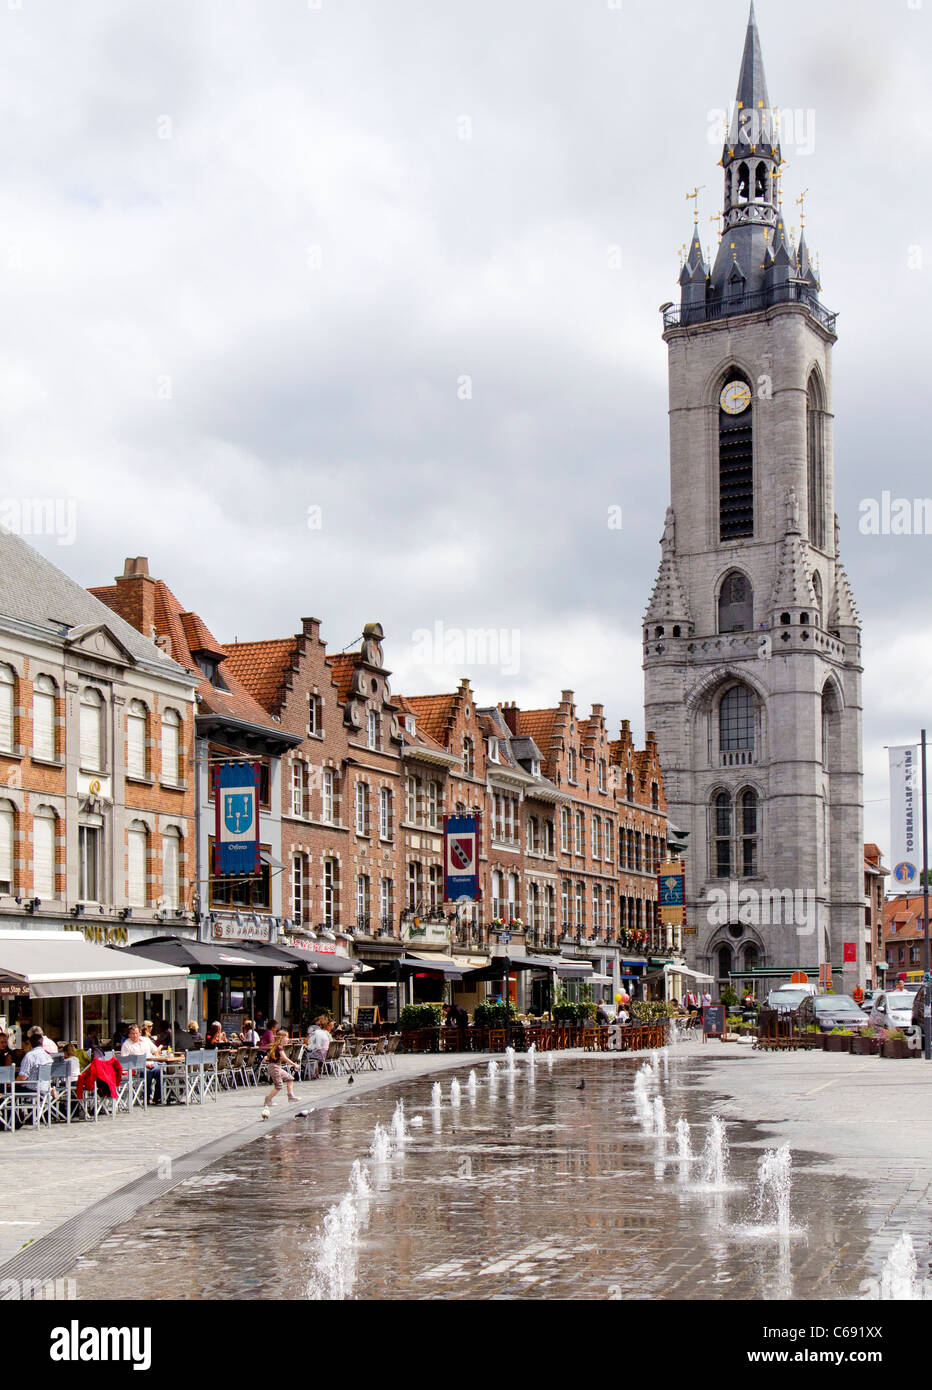 The Grand Place (Market Place) and the Belfry tower, Tournai, Belgium Stock Photo